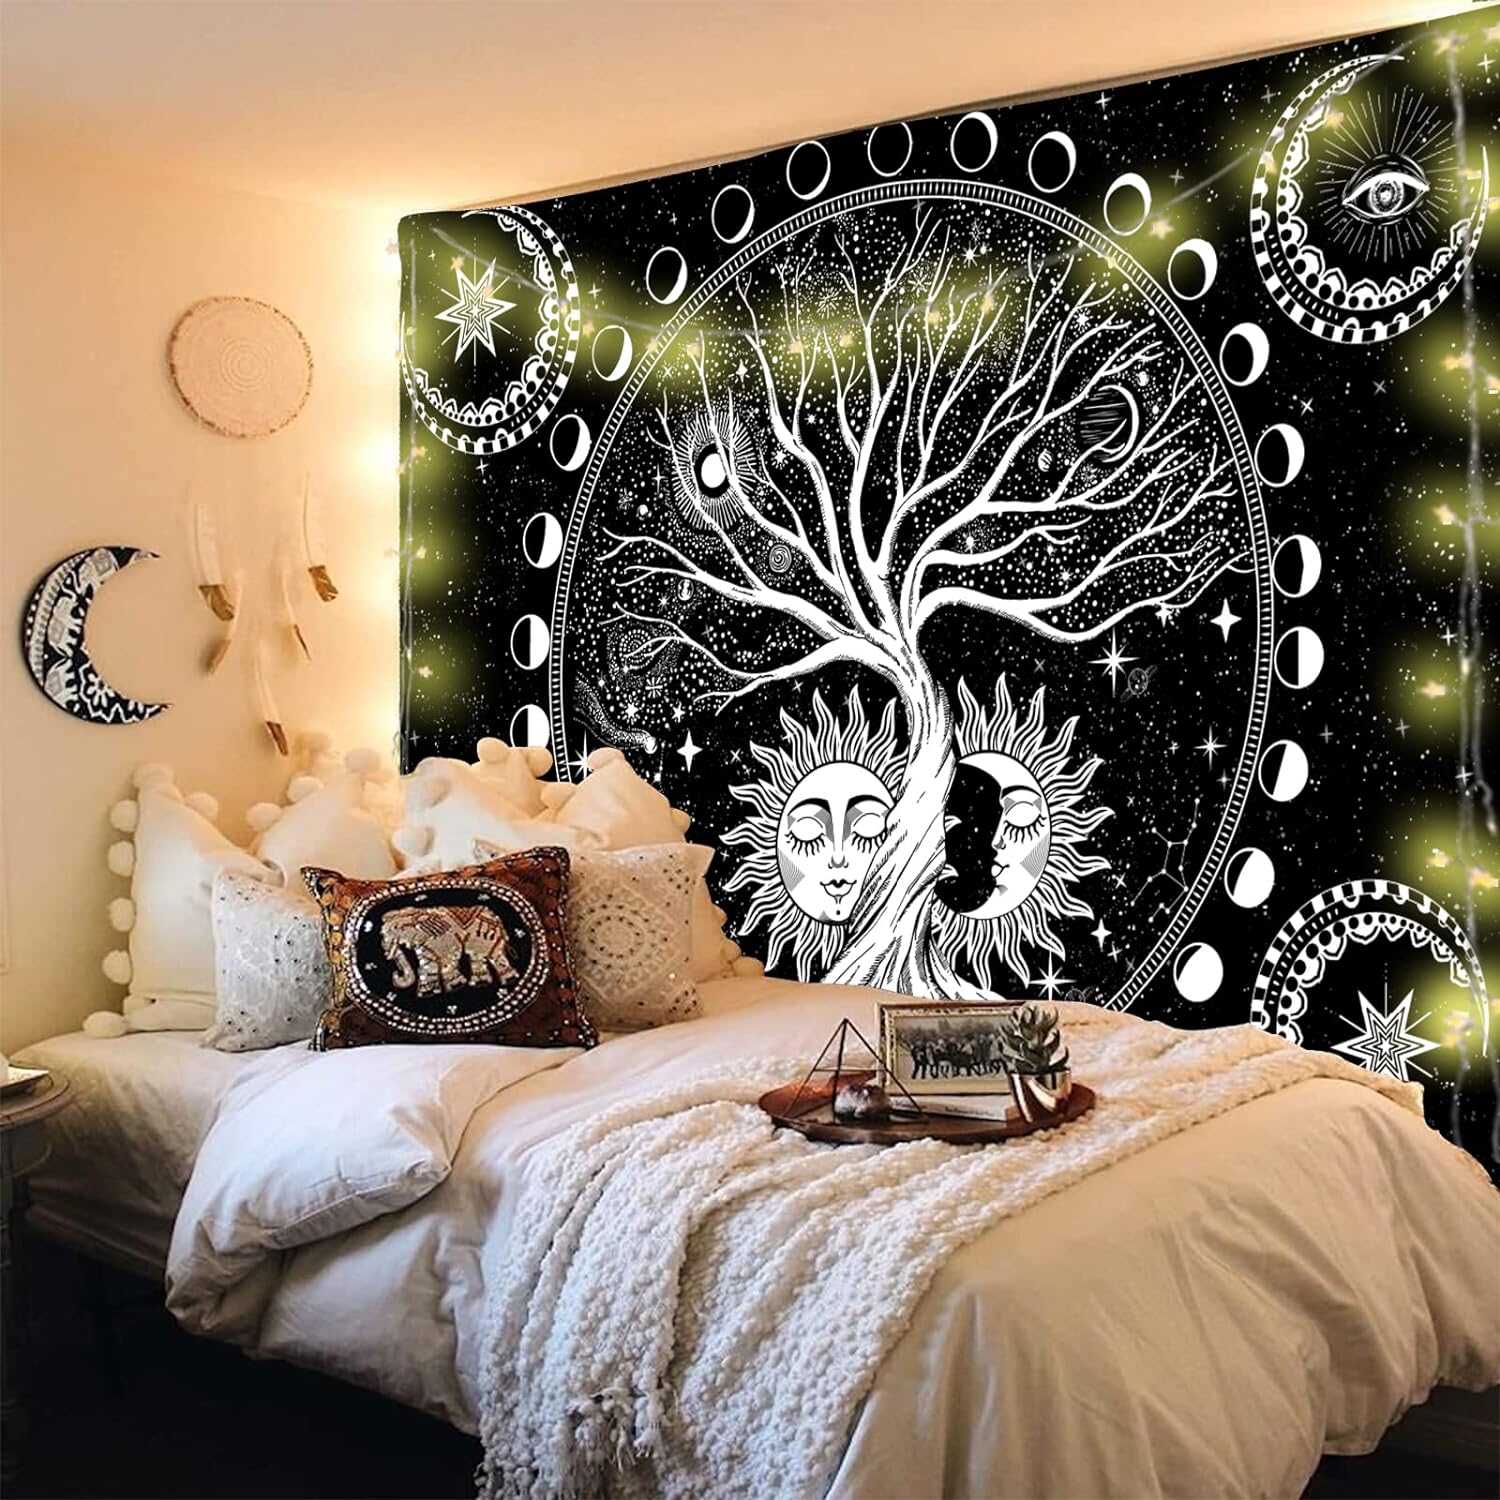 70.9ʺx 90.6ʺ Sun and Moon Tapestry Wall Hanging Bohemian Wall Decor Blanket for Bedroom Home Dorm Moon Phase Tree of Life, XL Moon Phase Tree of Life Tapestry